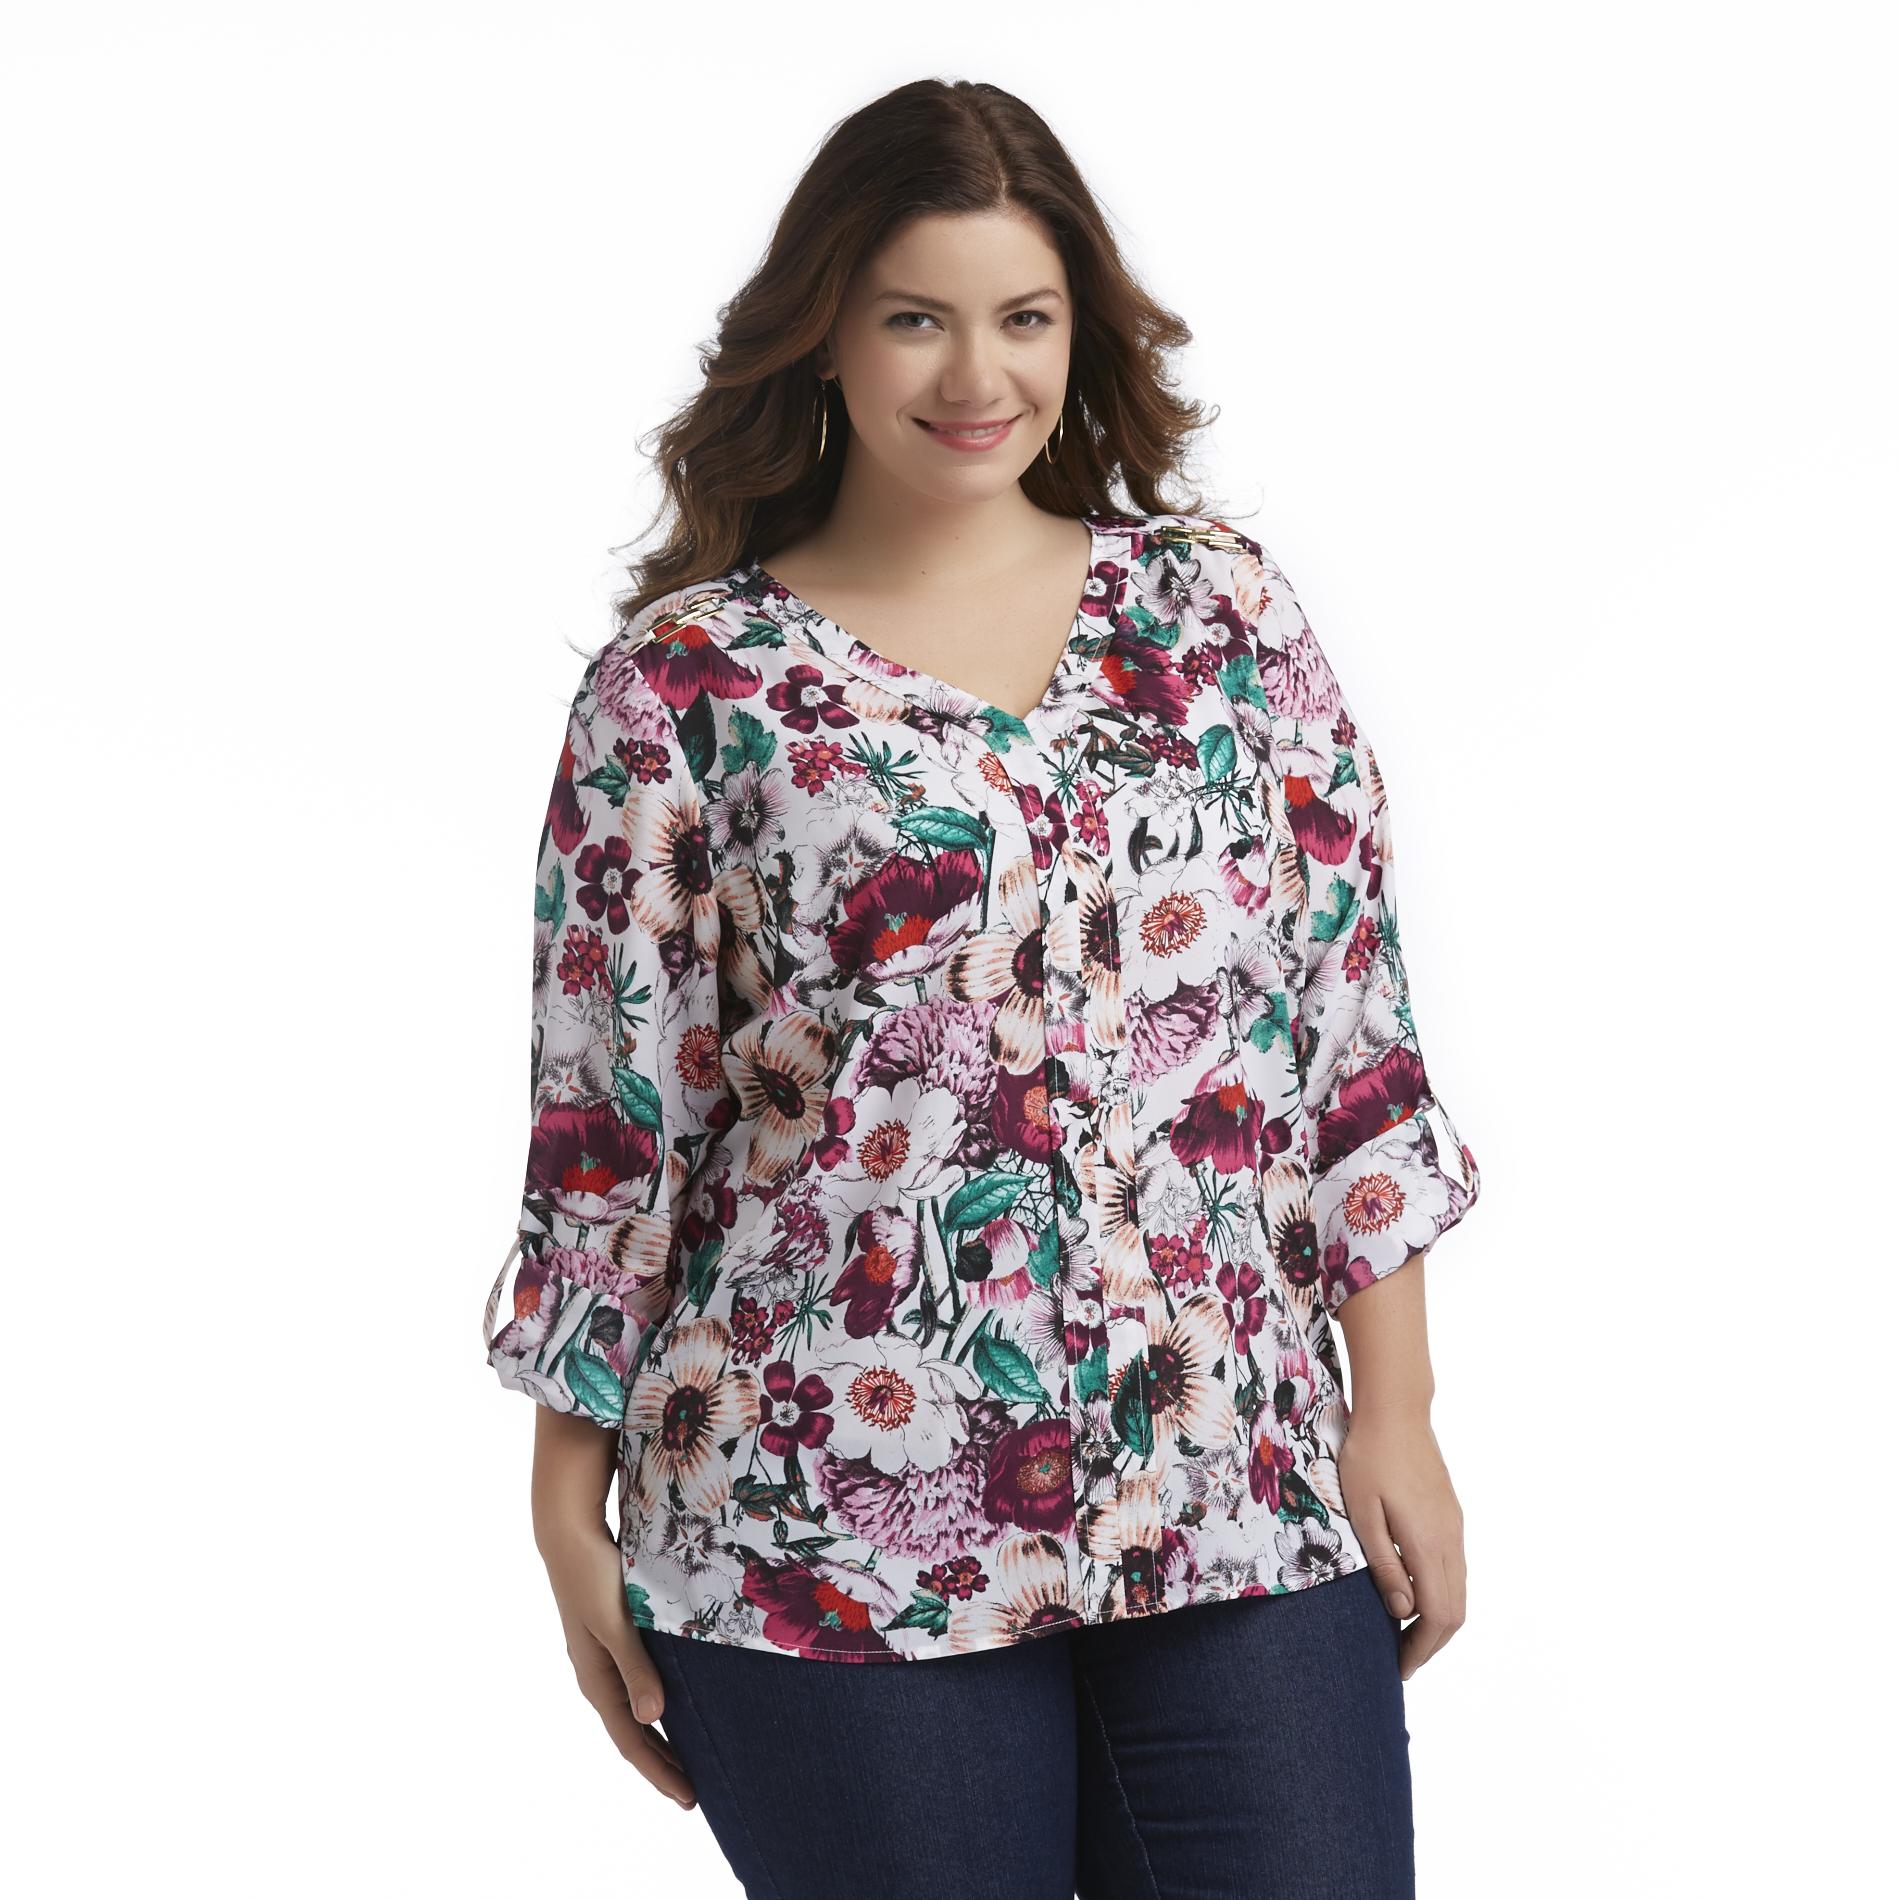 Jaclyn Smith Women's Plus Long-Sleeve V-Neck Top - Floral